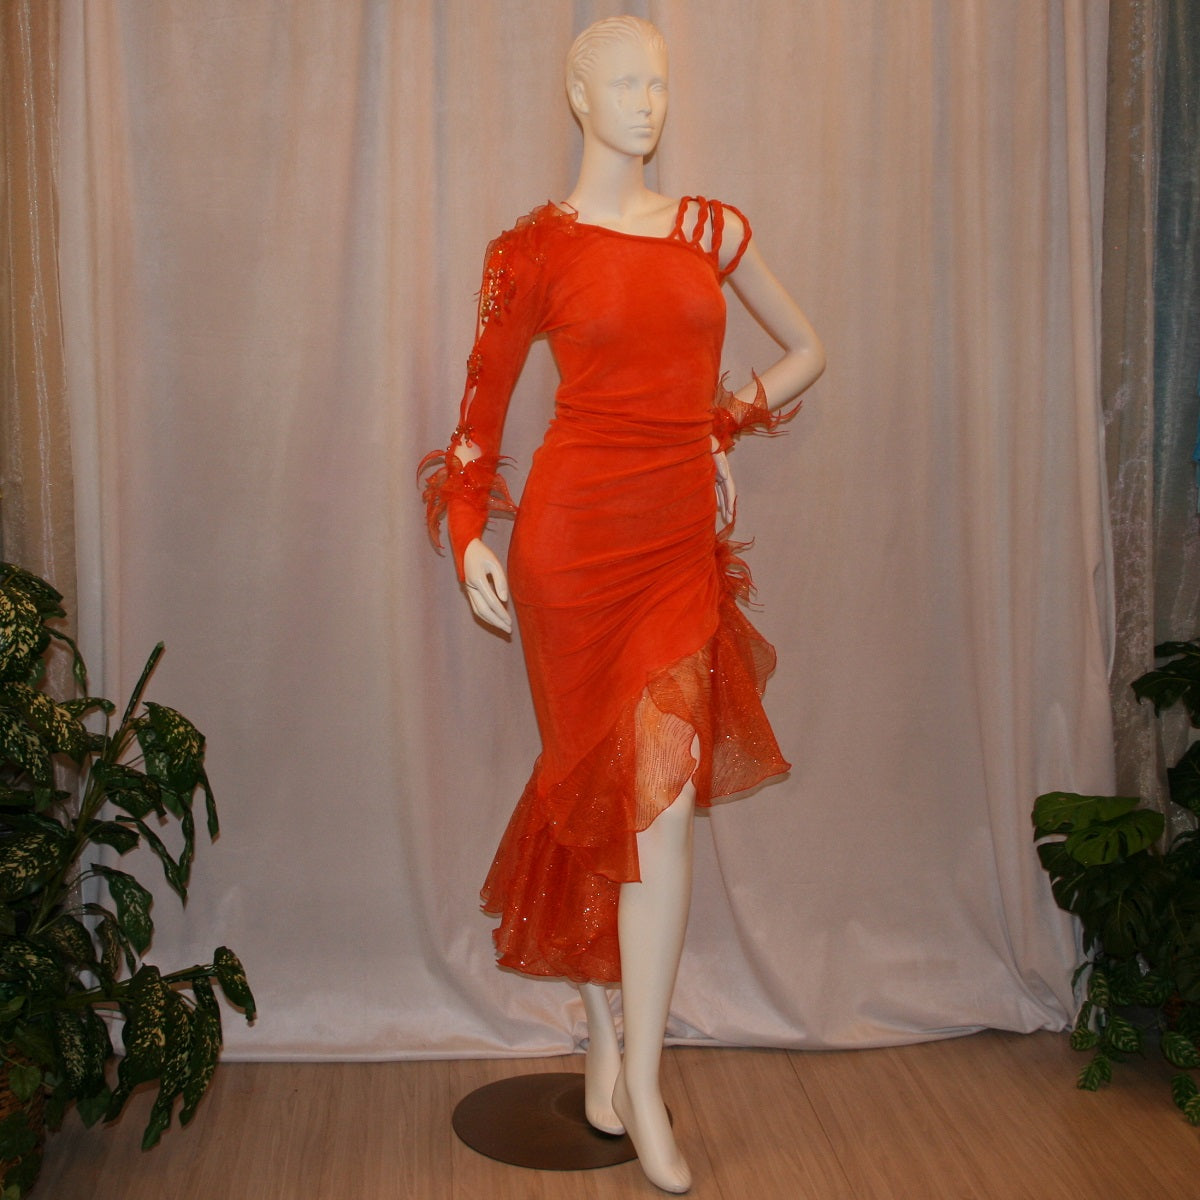 Crystal's Creations Orange Latin/rhythm dress was created in luxurious orange solid slinky with oodles of glitter organza flounces & accents, embellished with a touch of Swarovski hand beading.